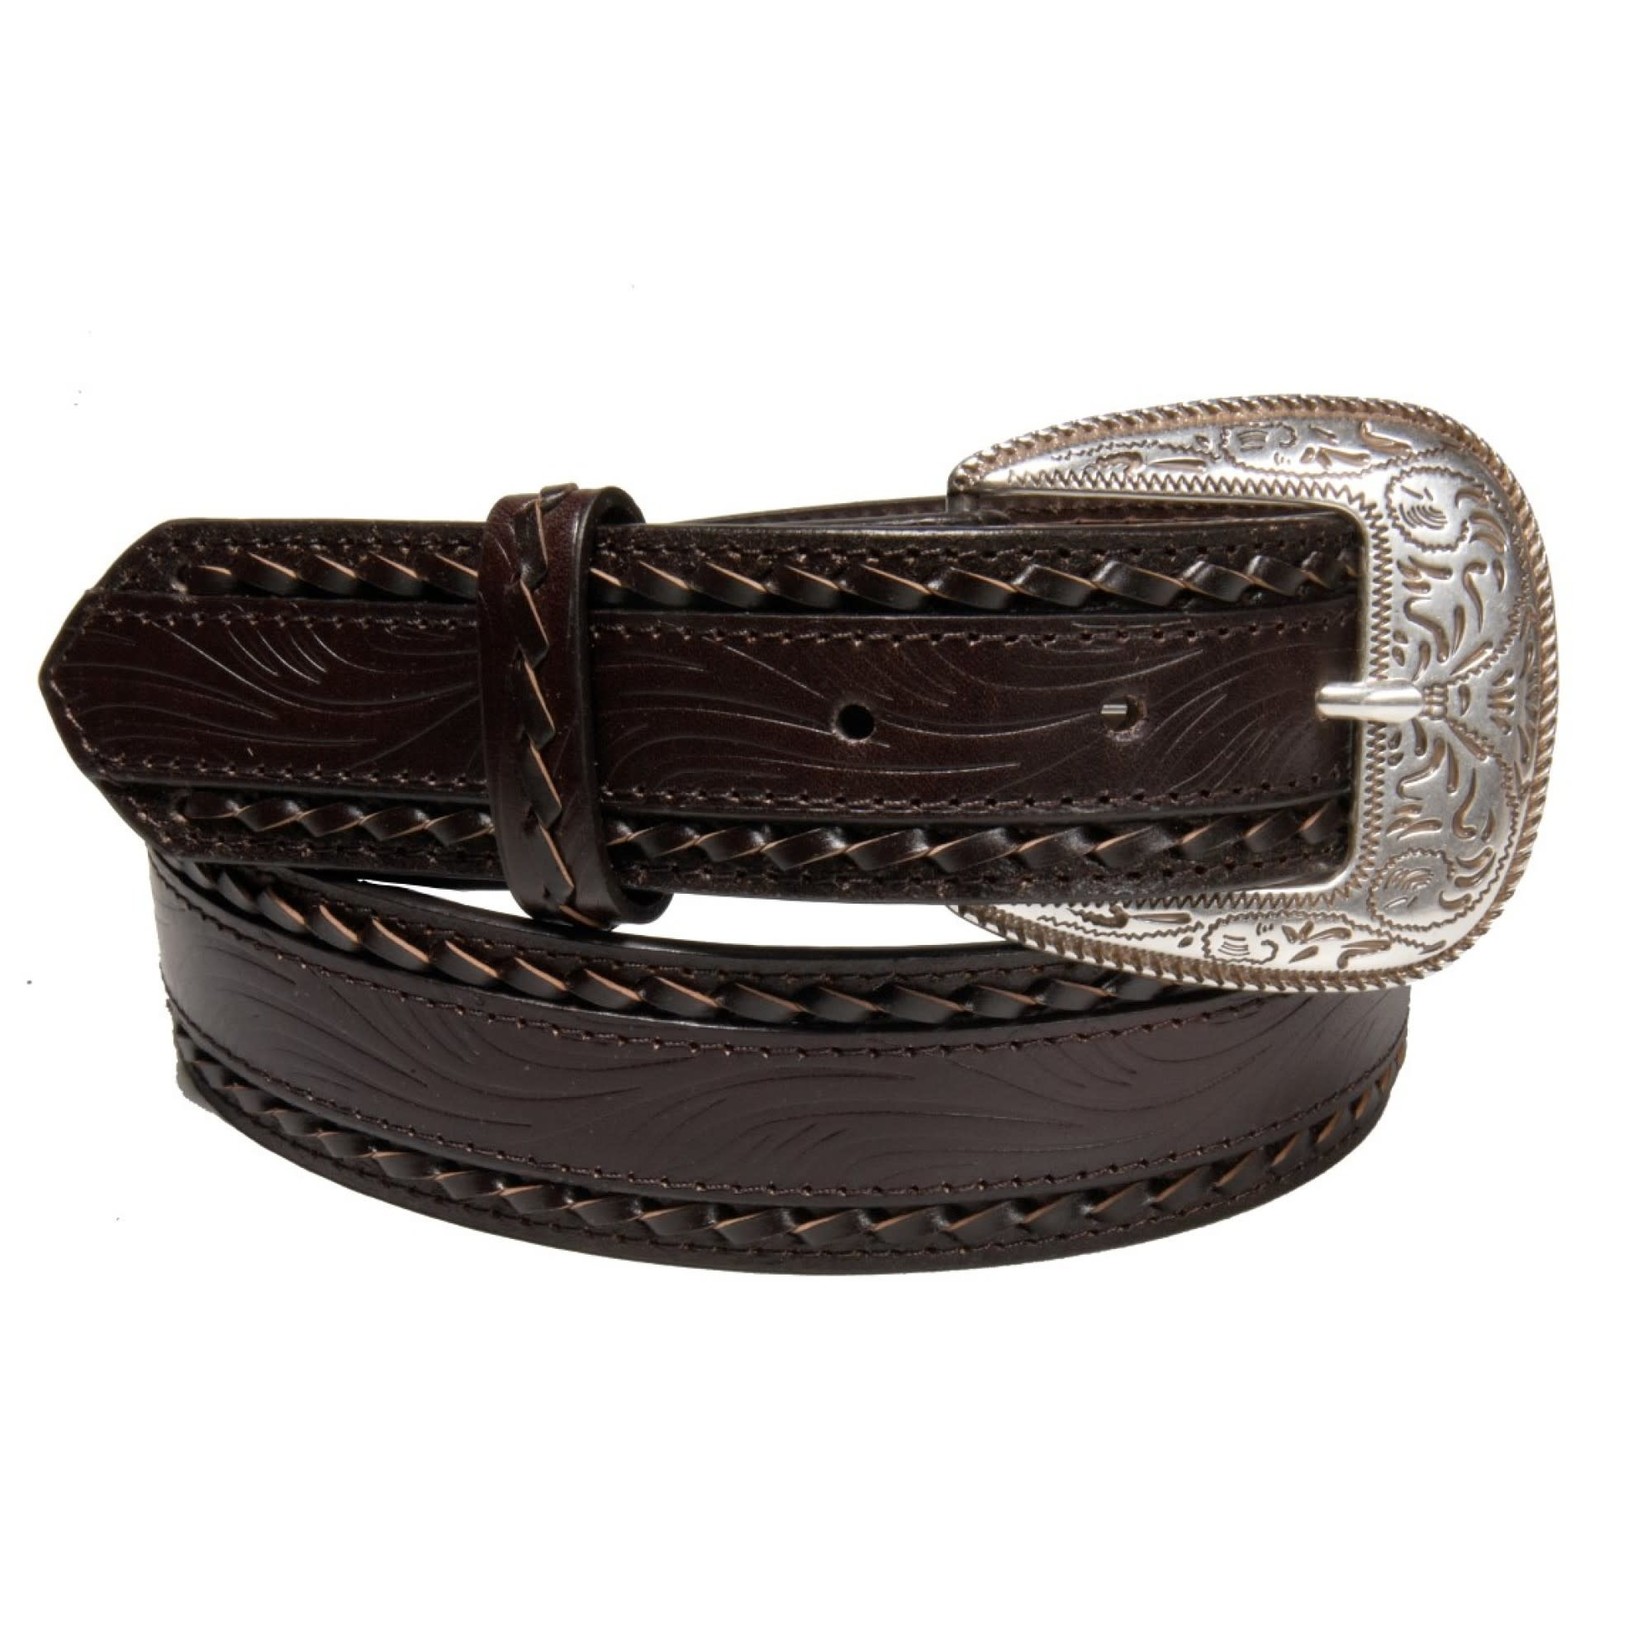 AndWest Embossed Edge Leather Belts